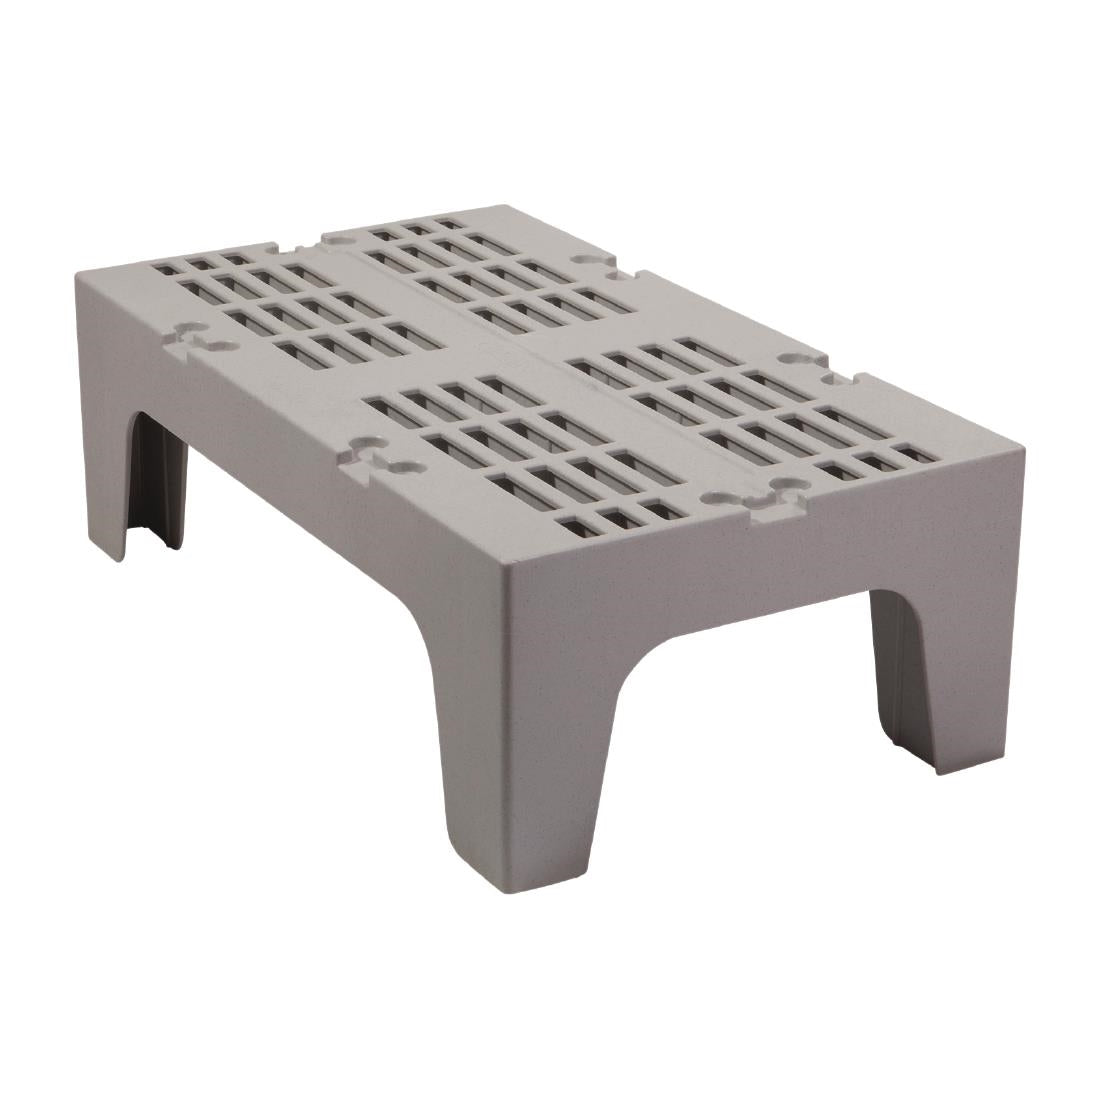 FE720 Cambro Dunnage Rack 300 x 533 x 915mm JD Catering Equipment Solutions Ltd